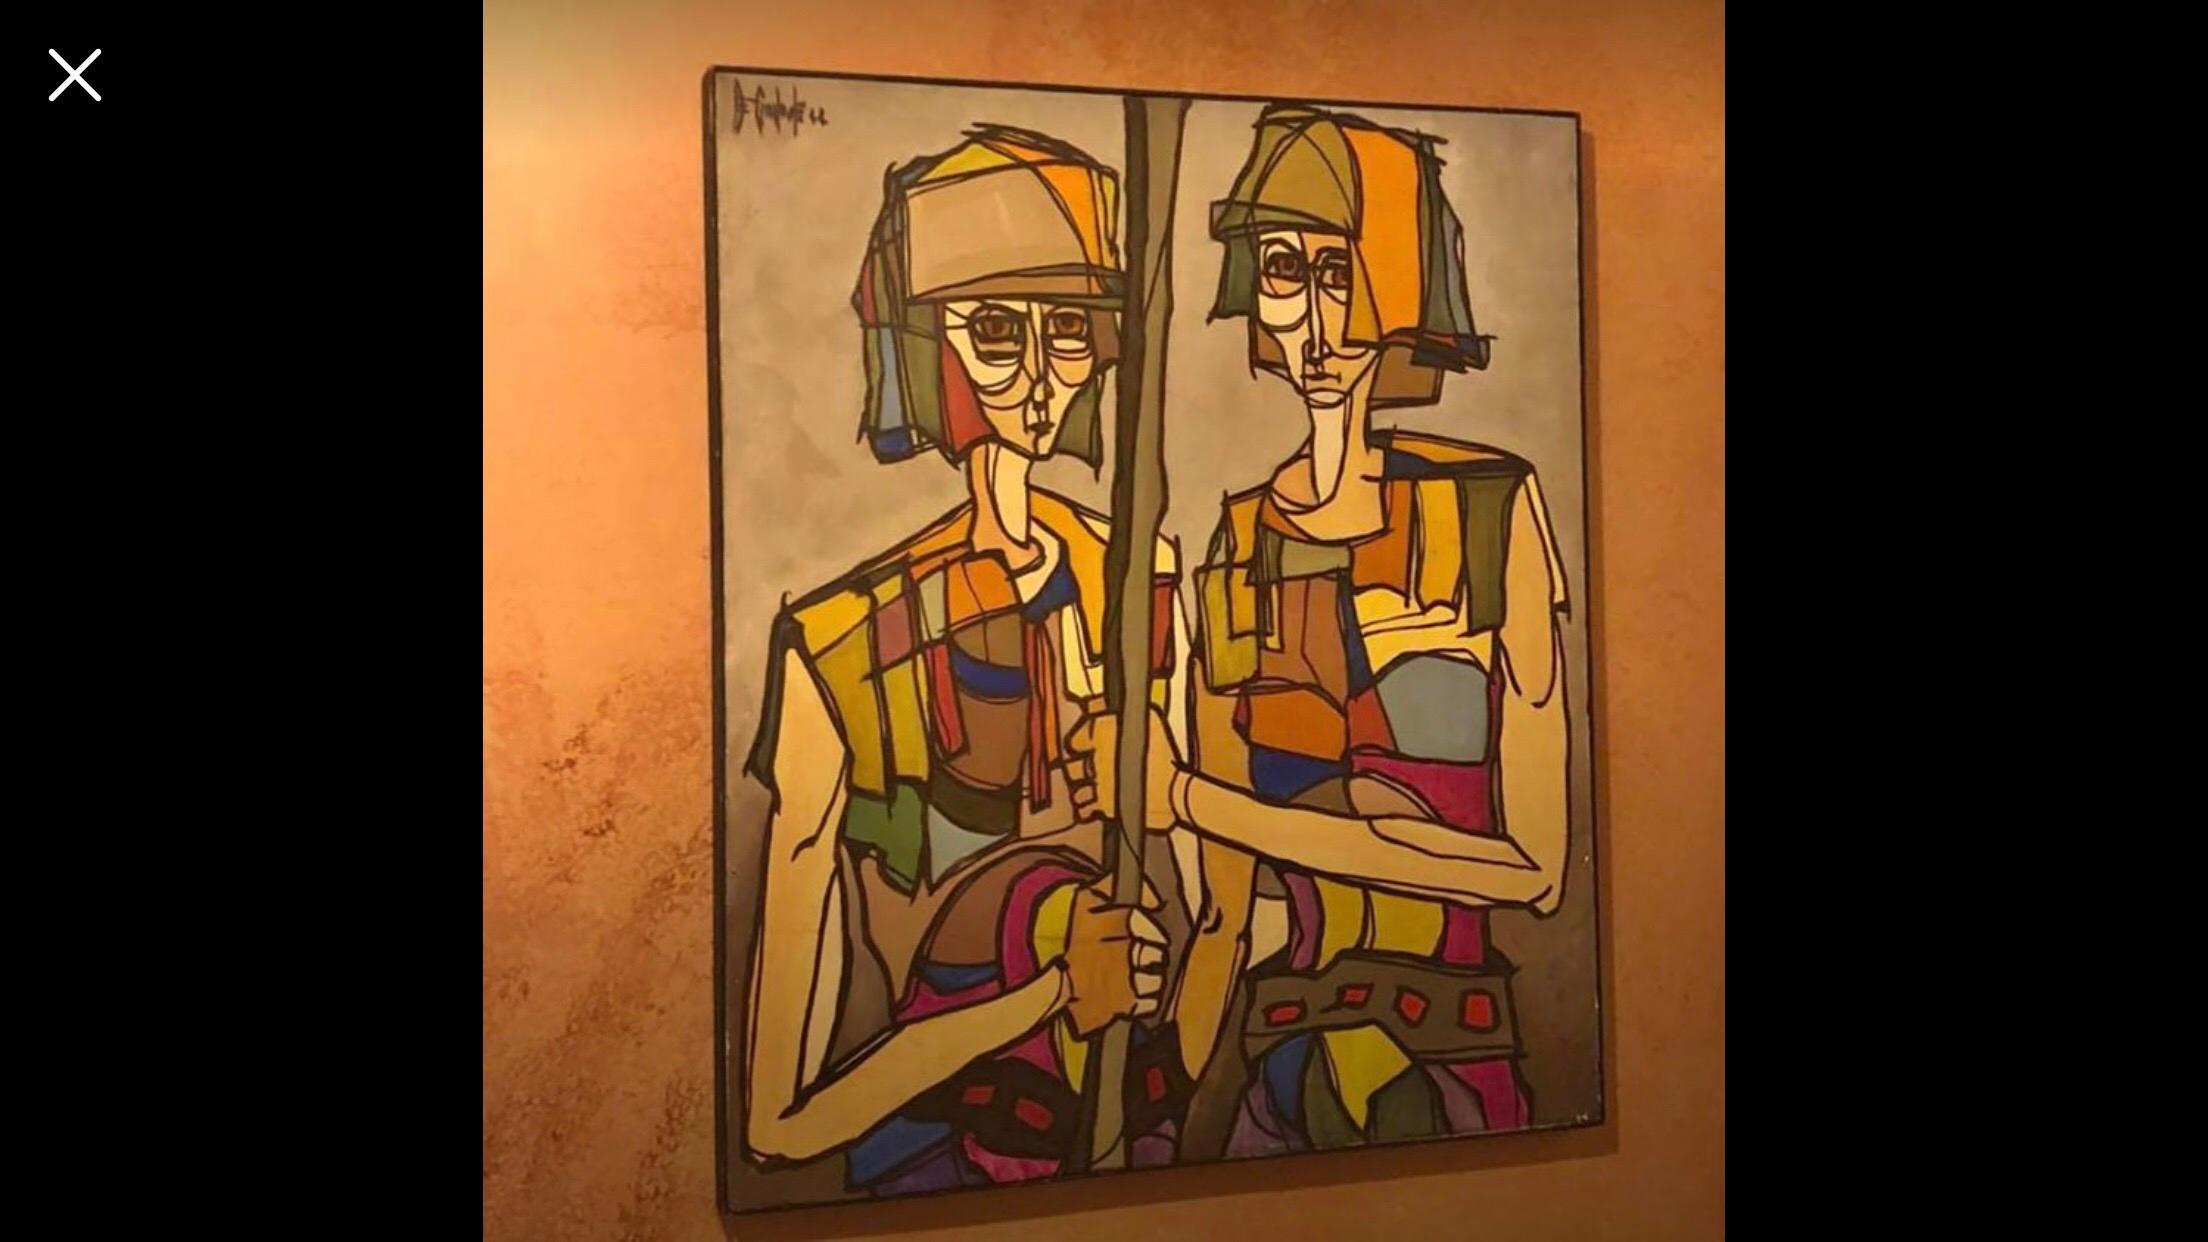 Signed Mid-Century Modern Picasso style painting. Abstract image of two warrior men, possibly pirates holding a sword. Colorful and rich Mid-Century Modern style. Dimensions are: 29.50 x 35 x 1.75. Dated 1966. We are unable to read the artist